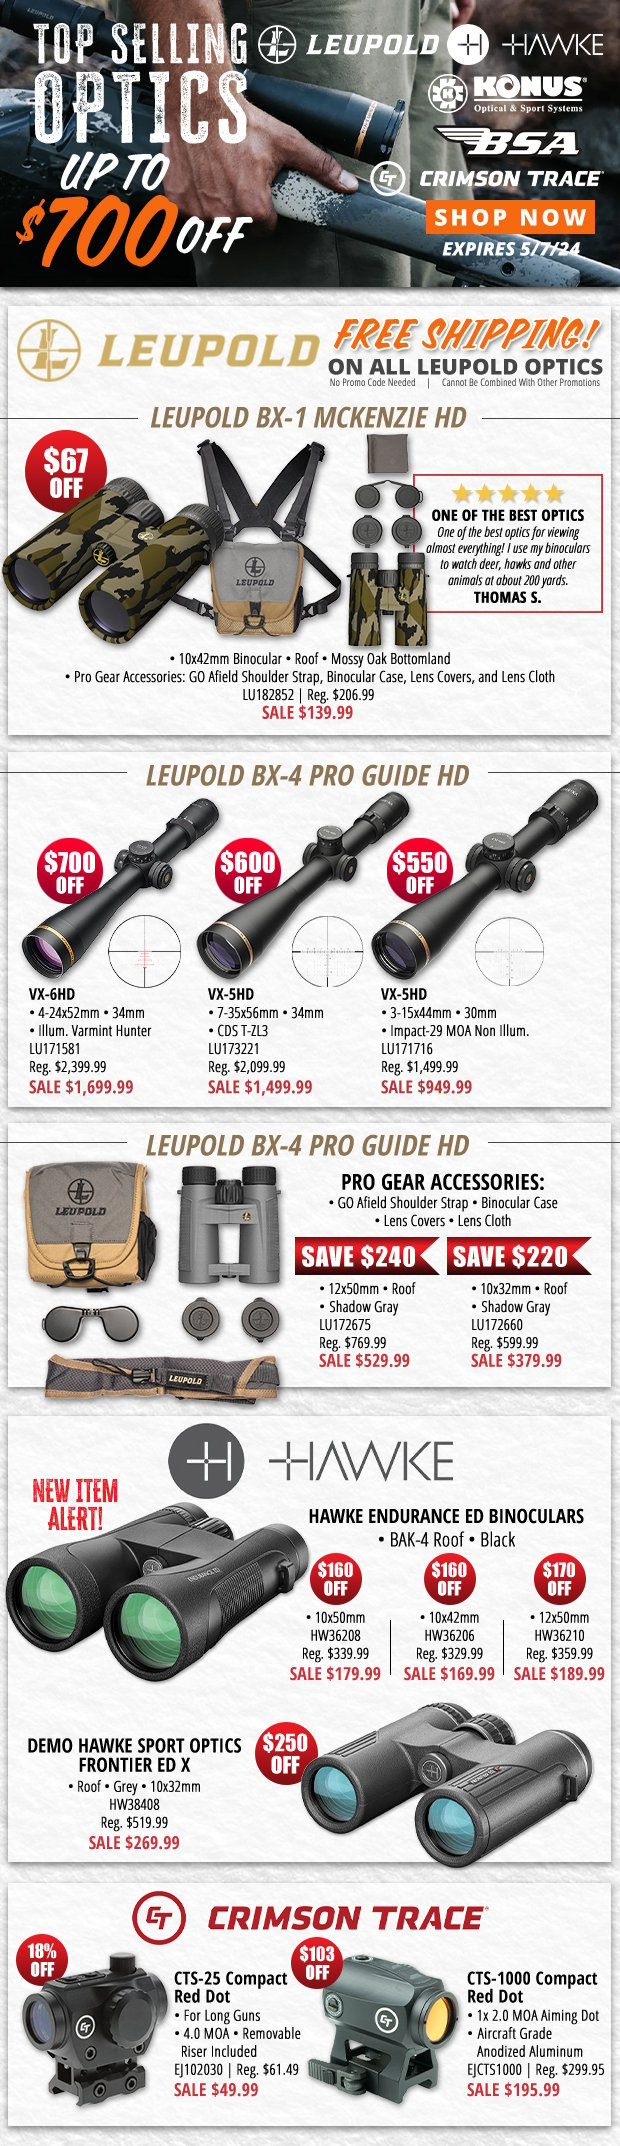 Up to $700 Top Selling Optics!